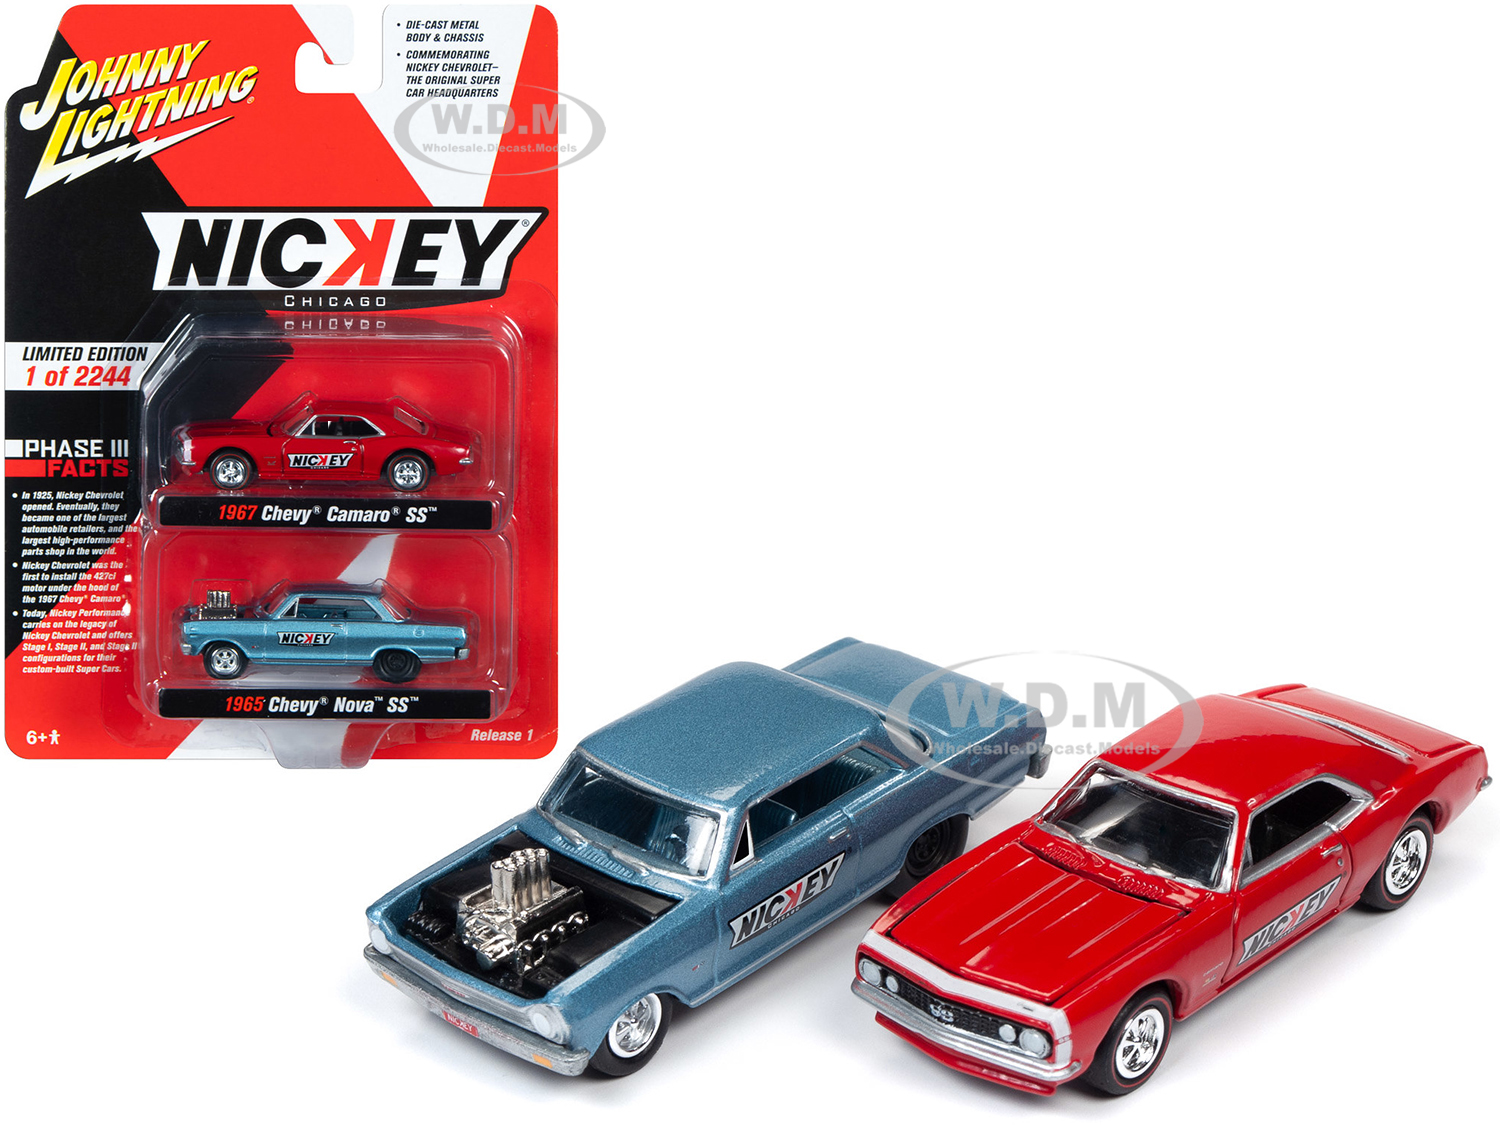 1965 Chevrolet Nova Ss Blue Metallic And 1967 Chevrolet Camaso Ss Red 2 Piece Set "nickey" Limited Edition To 2244 Pieces Worldwide 1/64 Diecast Mode